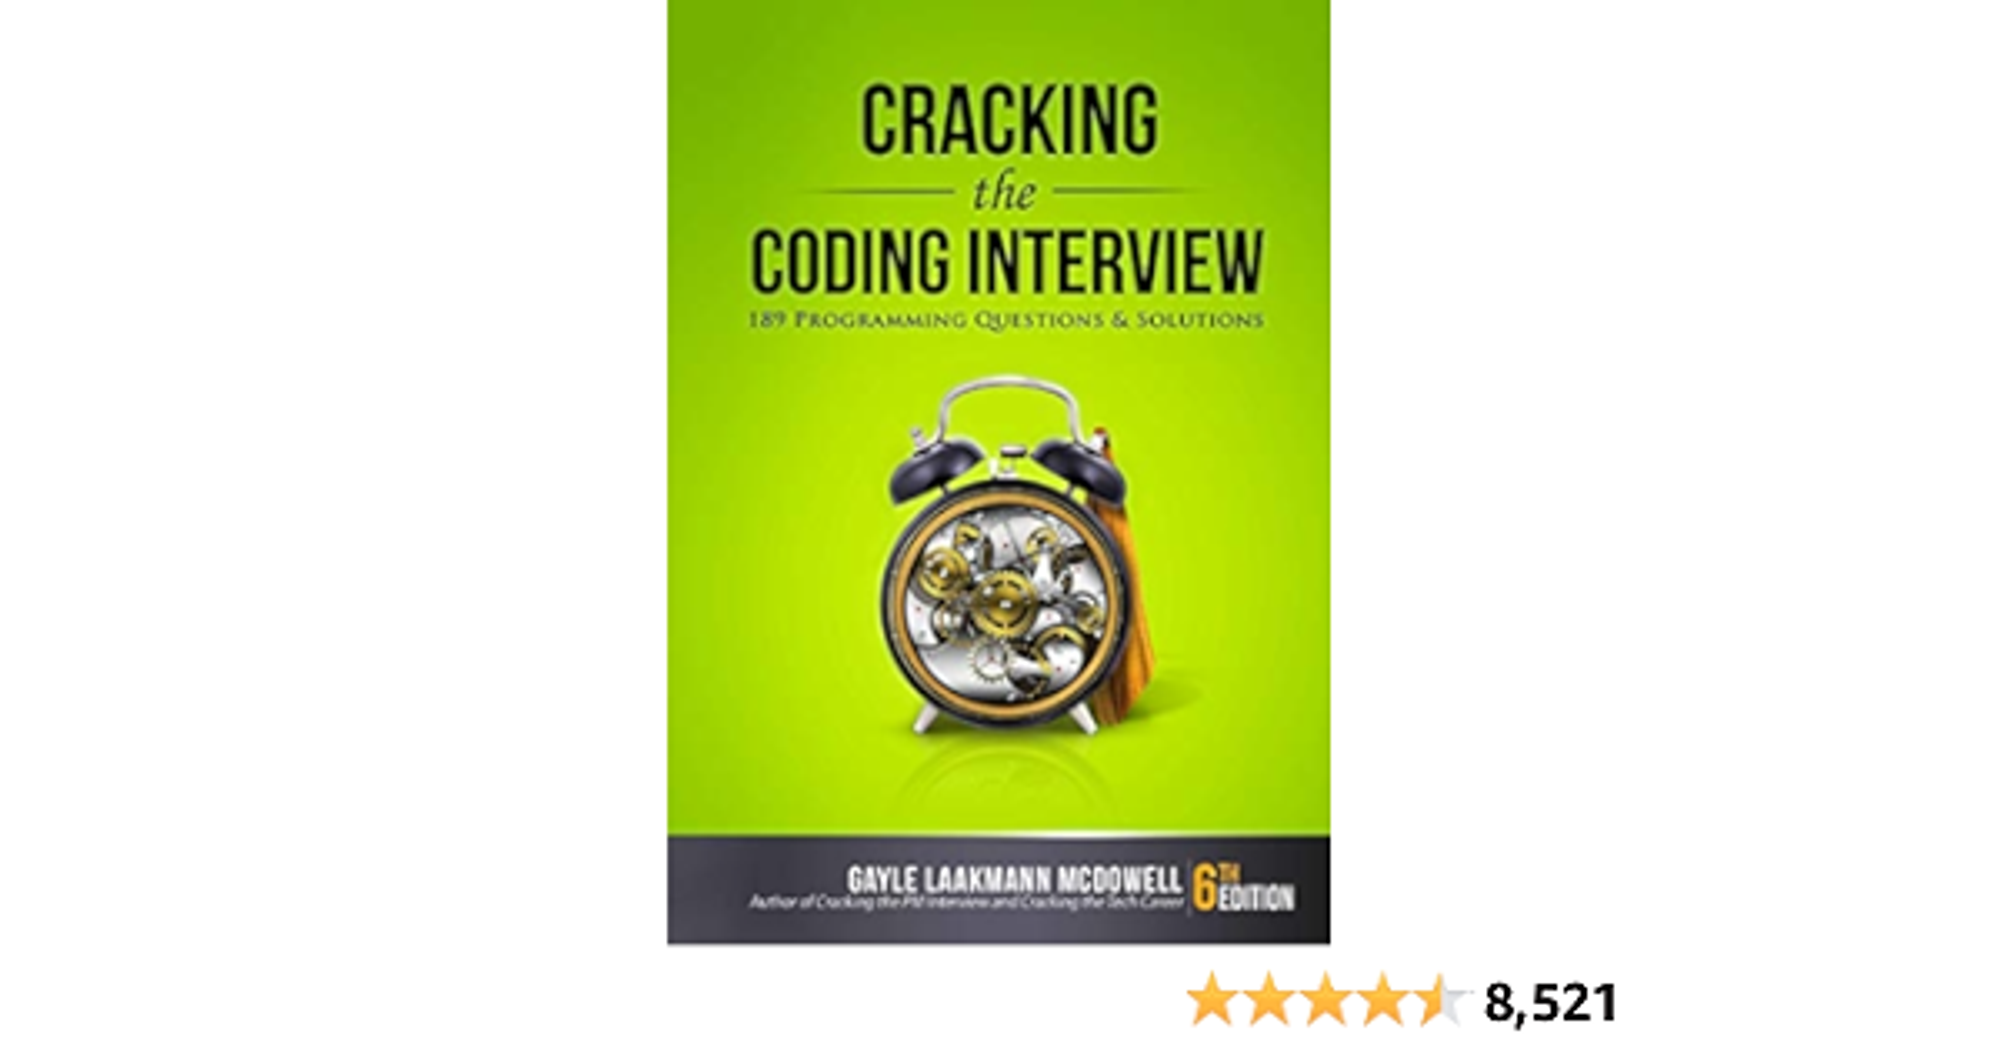 Cracking the Coding Interview, 6th Edition: 189 Programming Questions and Solutions